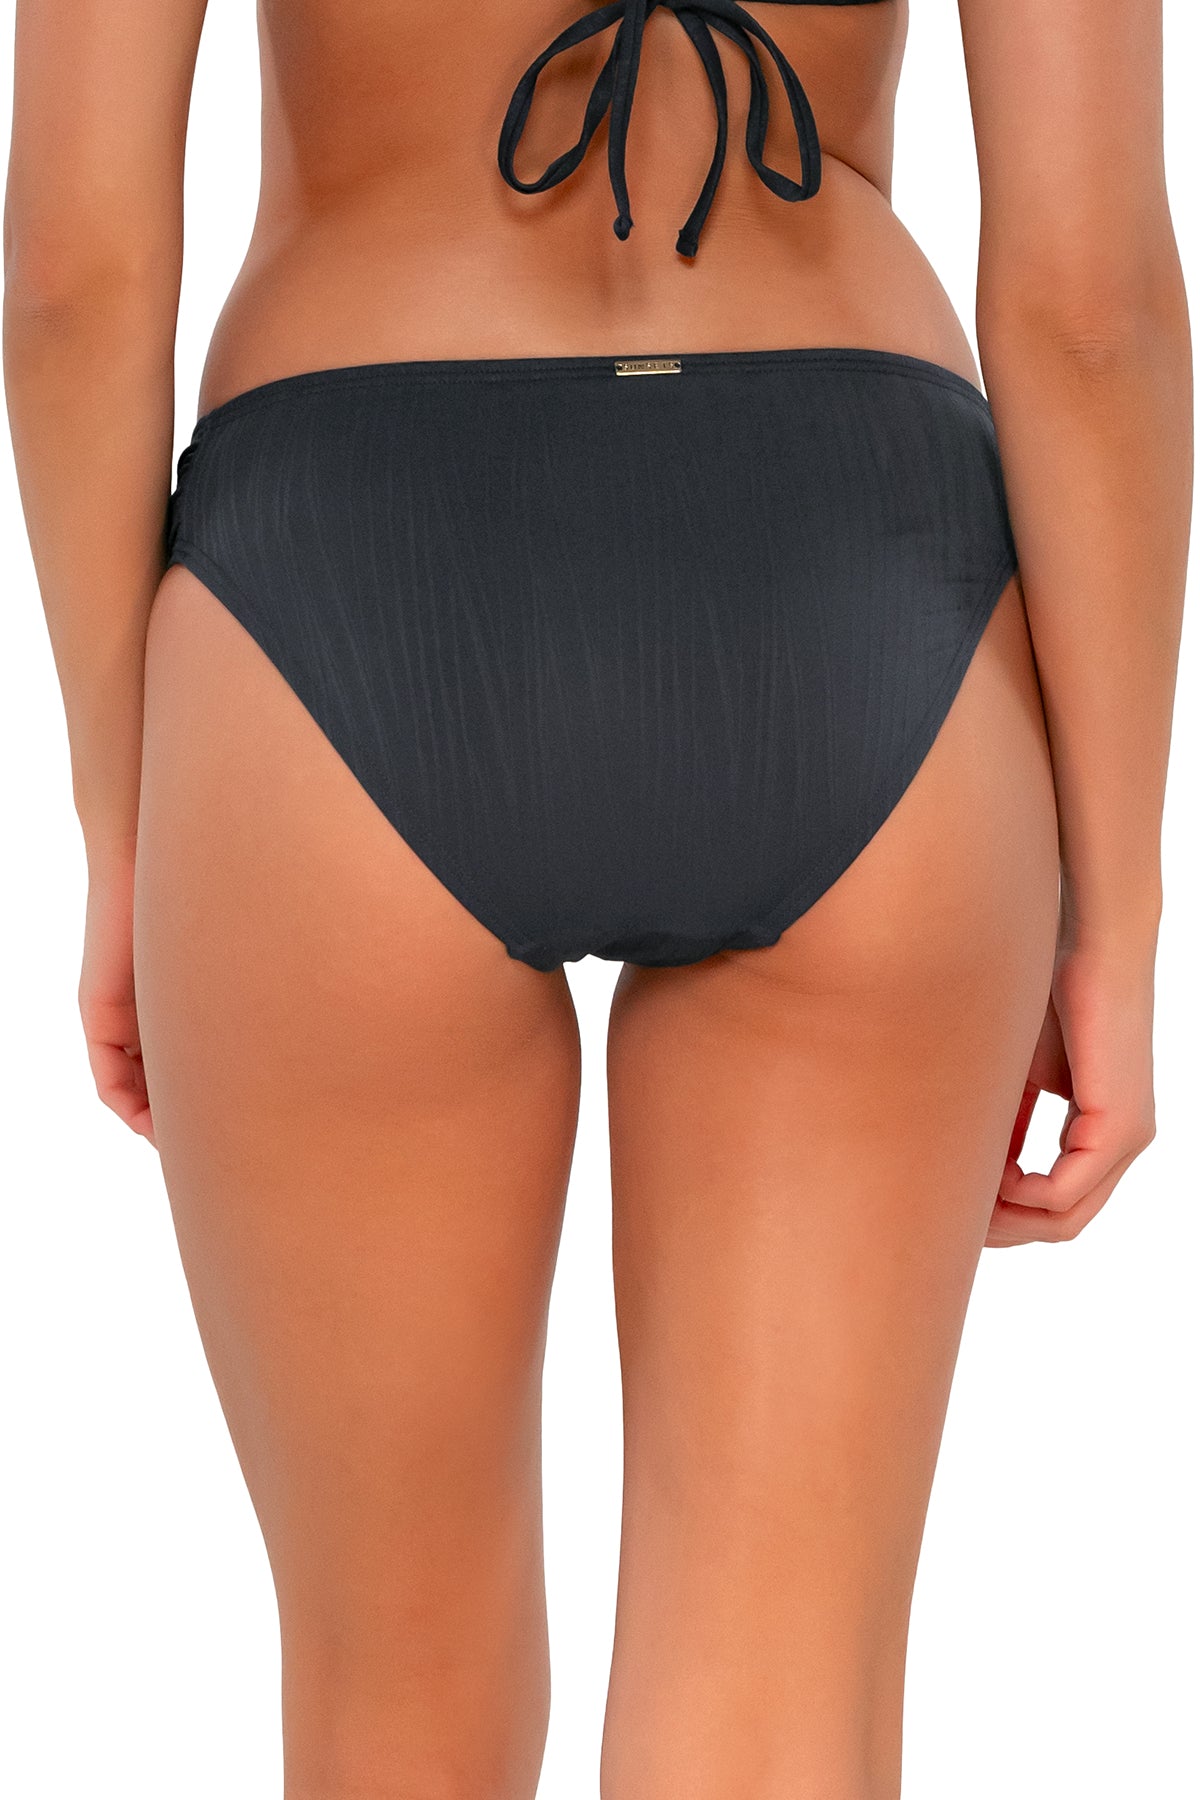 Back pose #1 of Daria wearing Sunsets Slate Seagrass Texture Audra Hipster Bottom